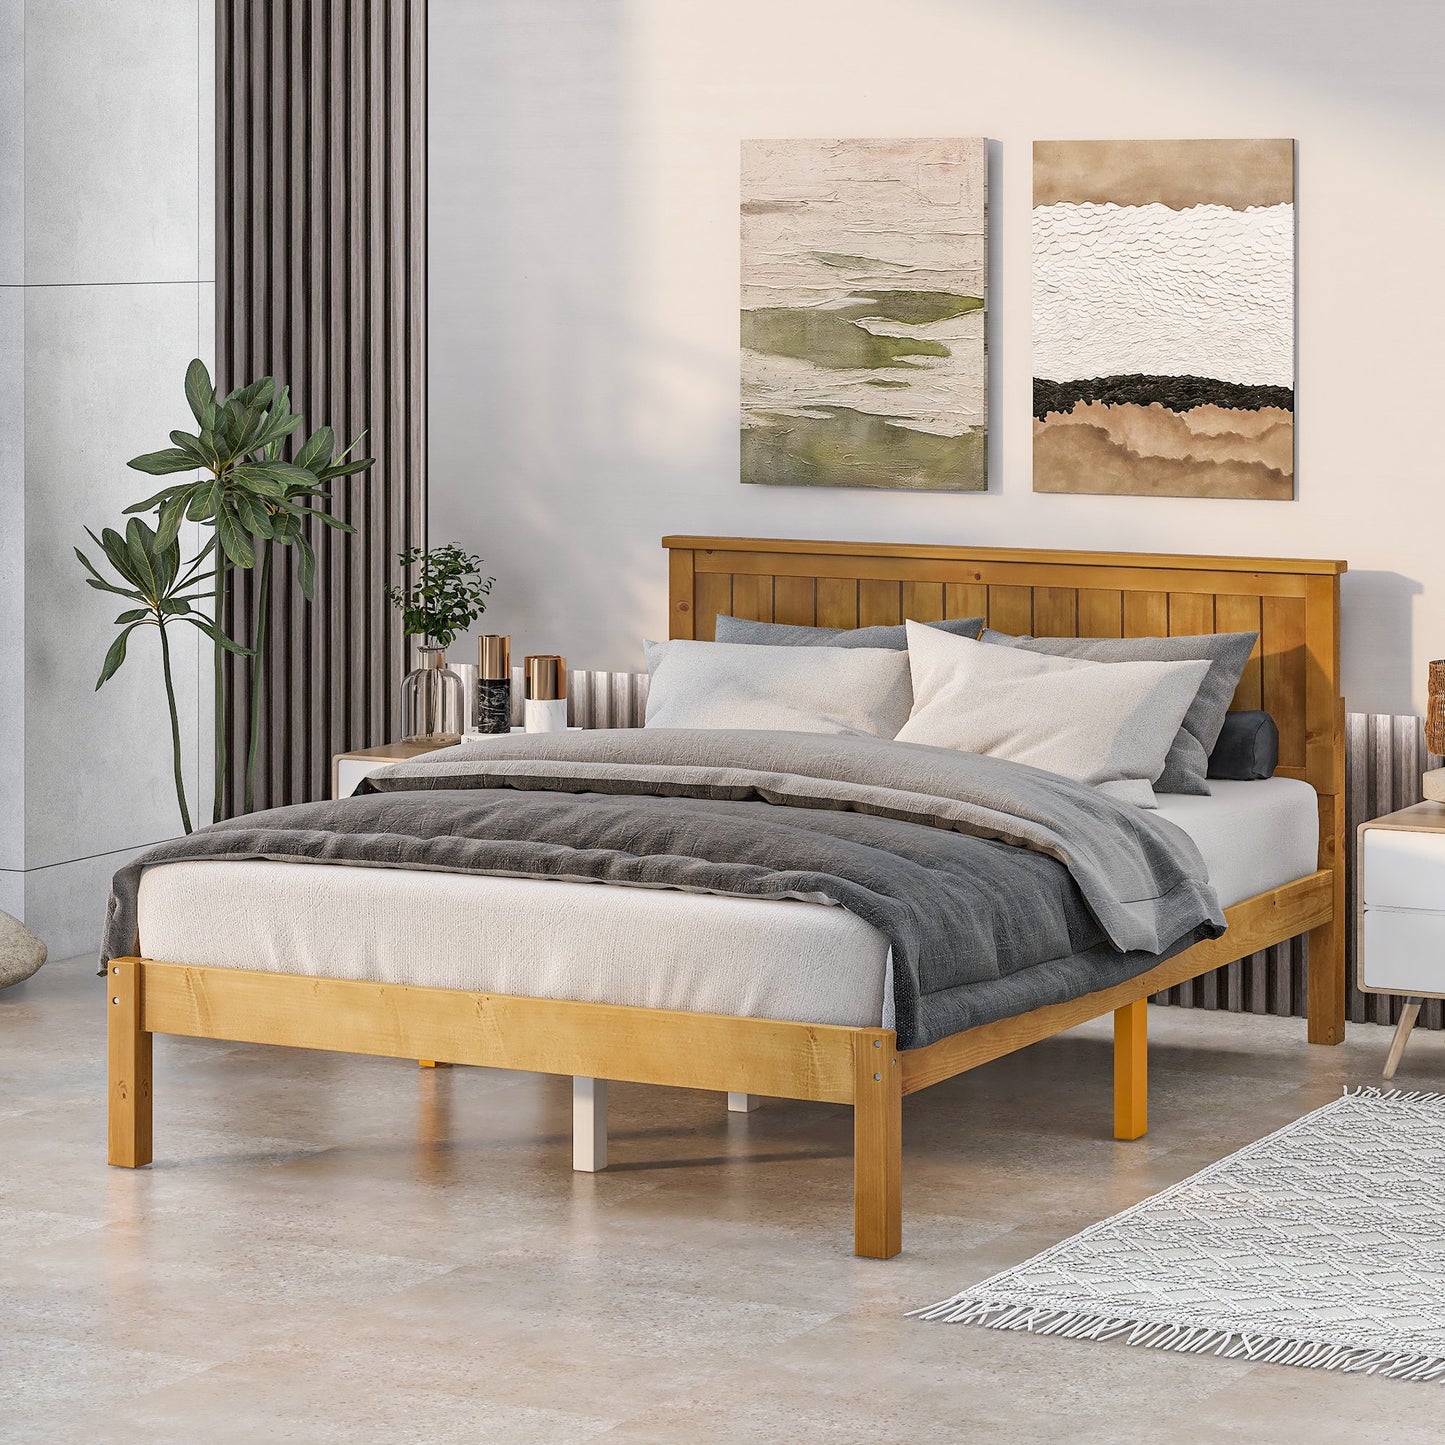 CASEMIOL Full Size Wood Bed Frame with Headboard,No Box Spring Needed Platform Bed,Heavy Duty Wood Slat Support,Under-Bed Storage,Country Style,Light Brown